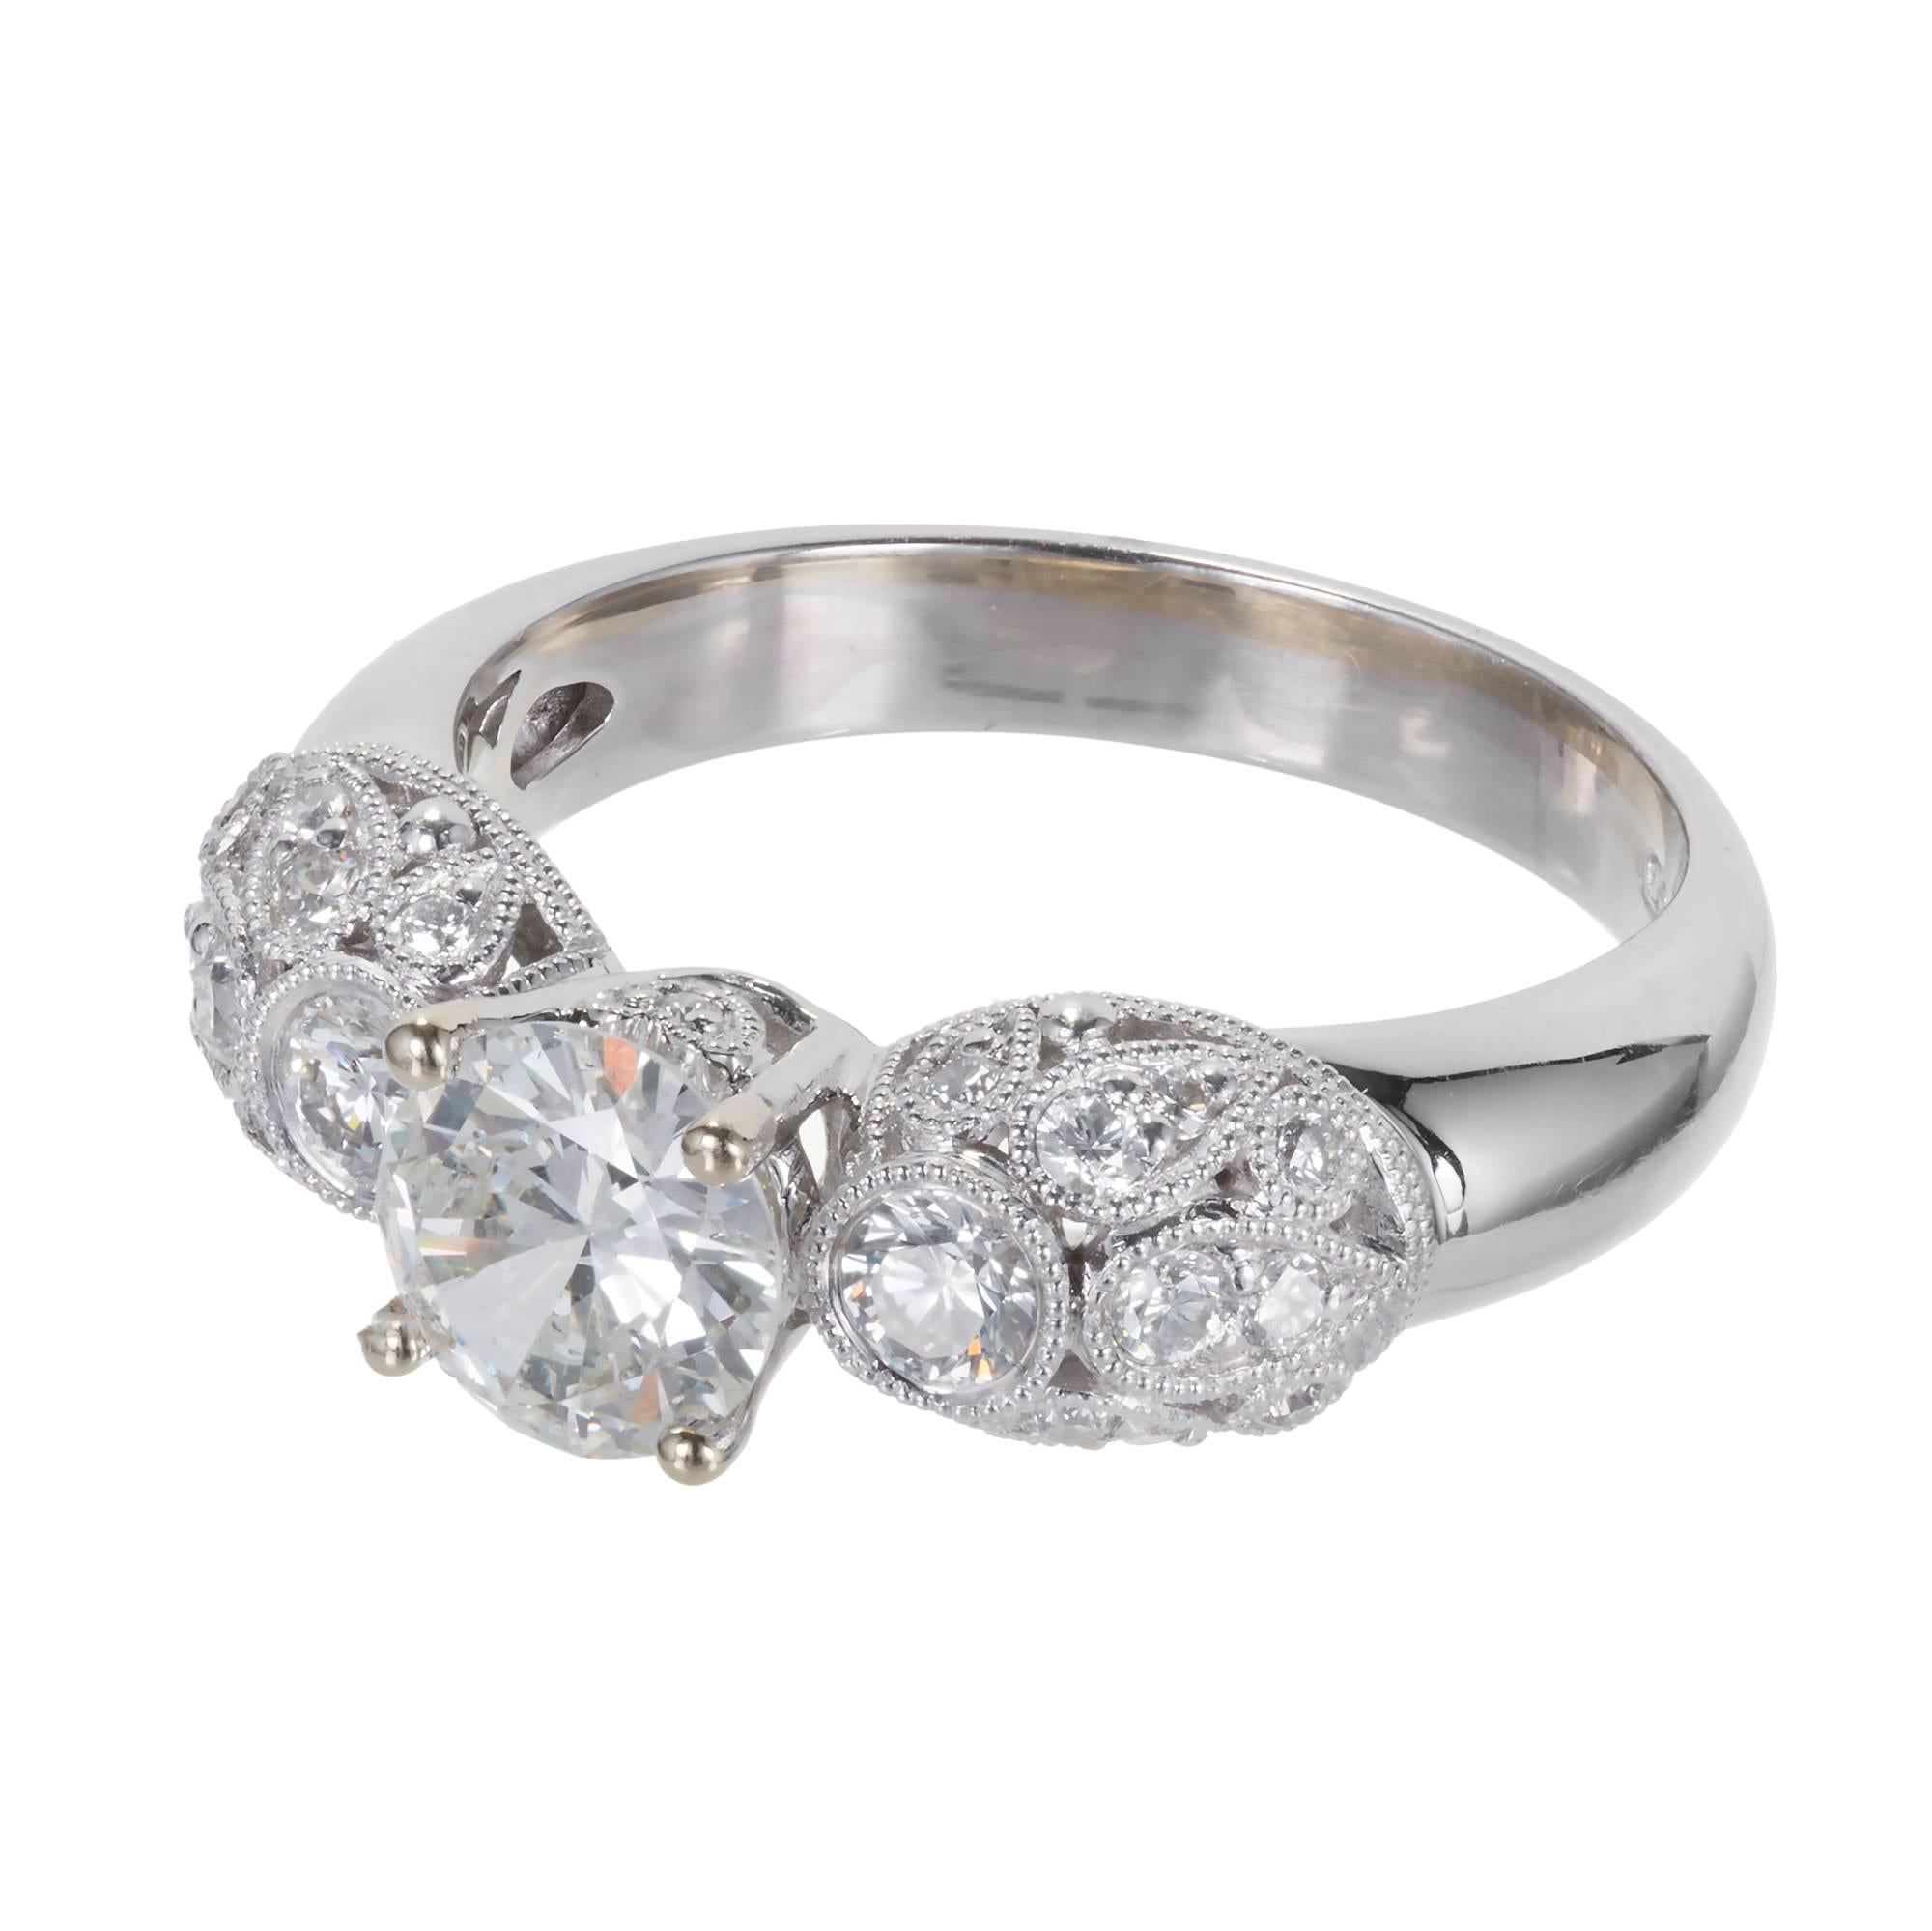 Sparkly transitional cut diamond engagement ring. .81ct diamond in a white gold domed and bead set setting.

18k White gold
 1 transitional round brilliant cut diamond, approx. total weight .81cts, I, SI2, 6.31 x 6.38 x 3.18mm, Depth: 50.1%  Table: